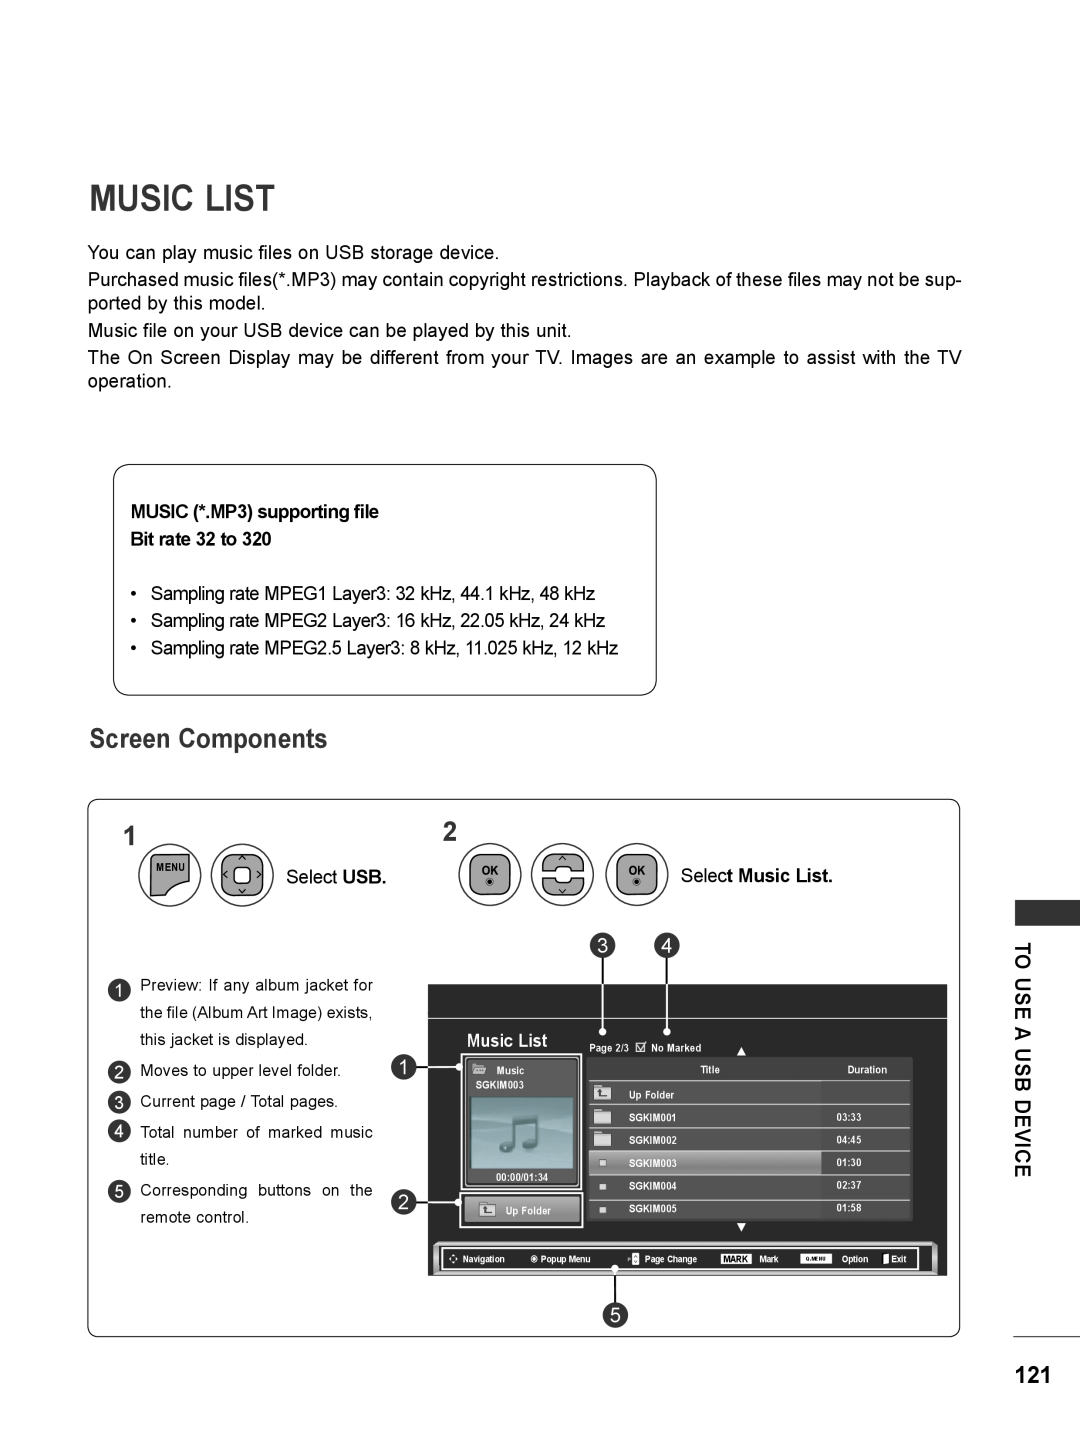 LG Electronics M2780DN, M2780DF Screen Components, MUSIC *.MP3 supporting file Bit rate 32 to, Select Music List 